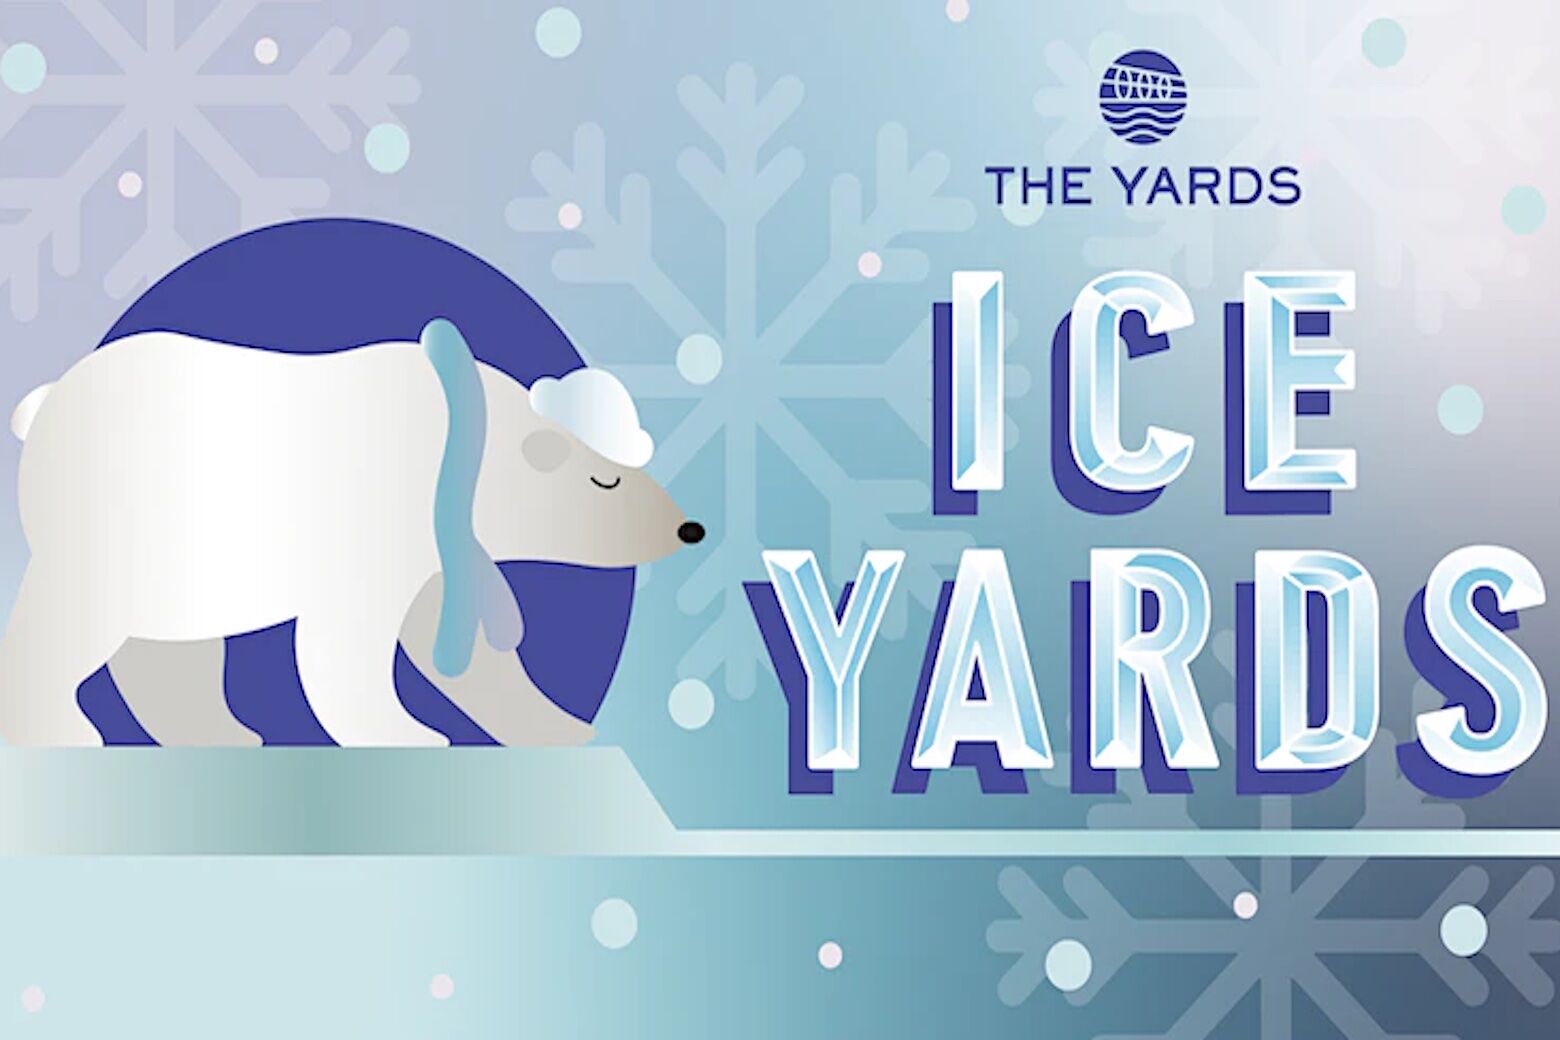 Ice Yards returns to Navy Yard with polar plunge to benefit Special